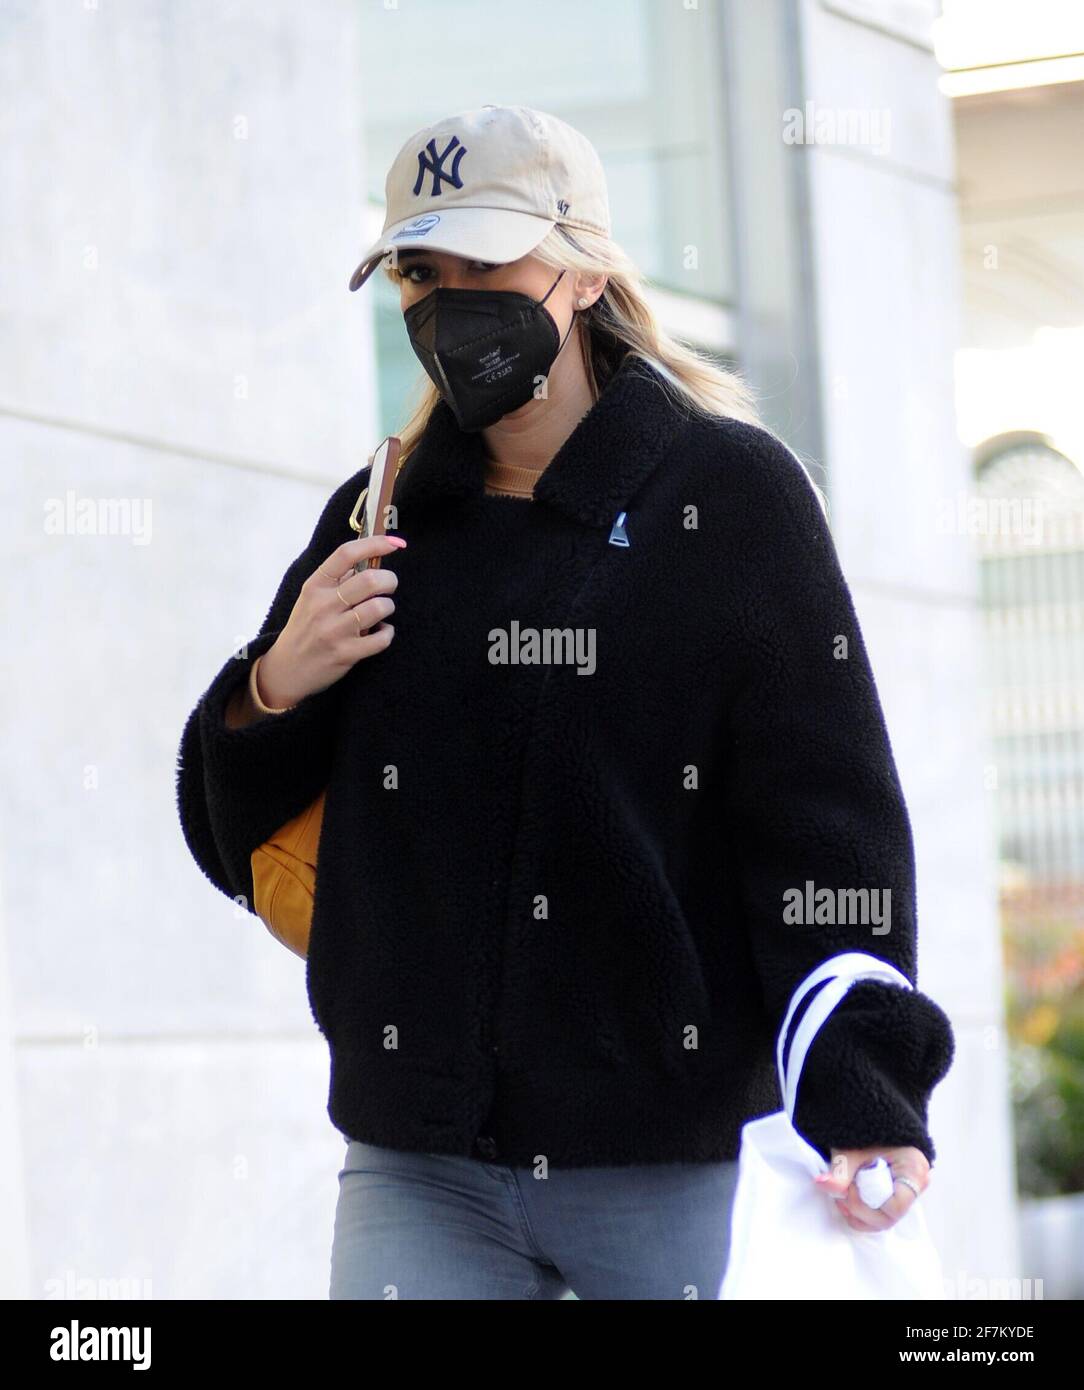 Milan, Diletta Leotta gets picked up after work After going to work, with a  mask pulled down to her eyes and a cap to try not to be recognized, Diletta  Leotta gets